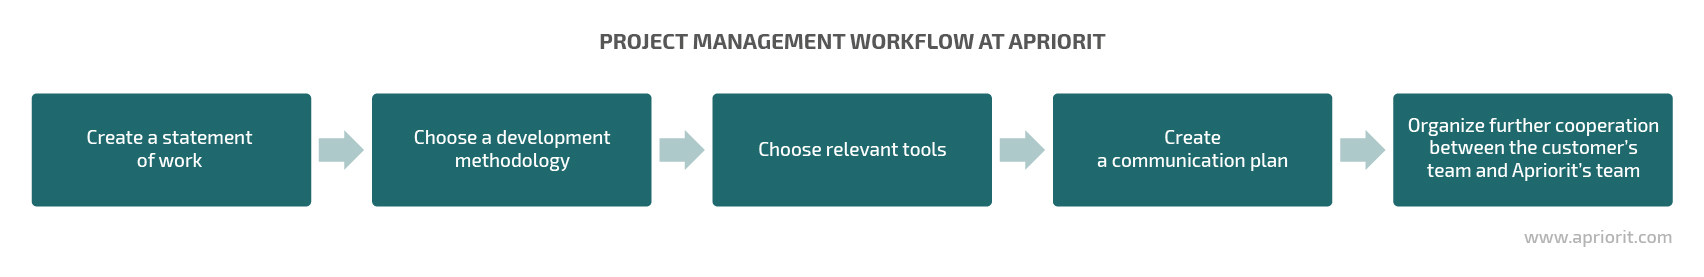 Project management workflow at Apriorit